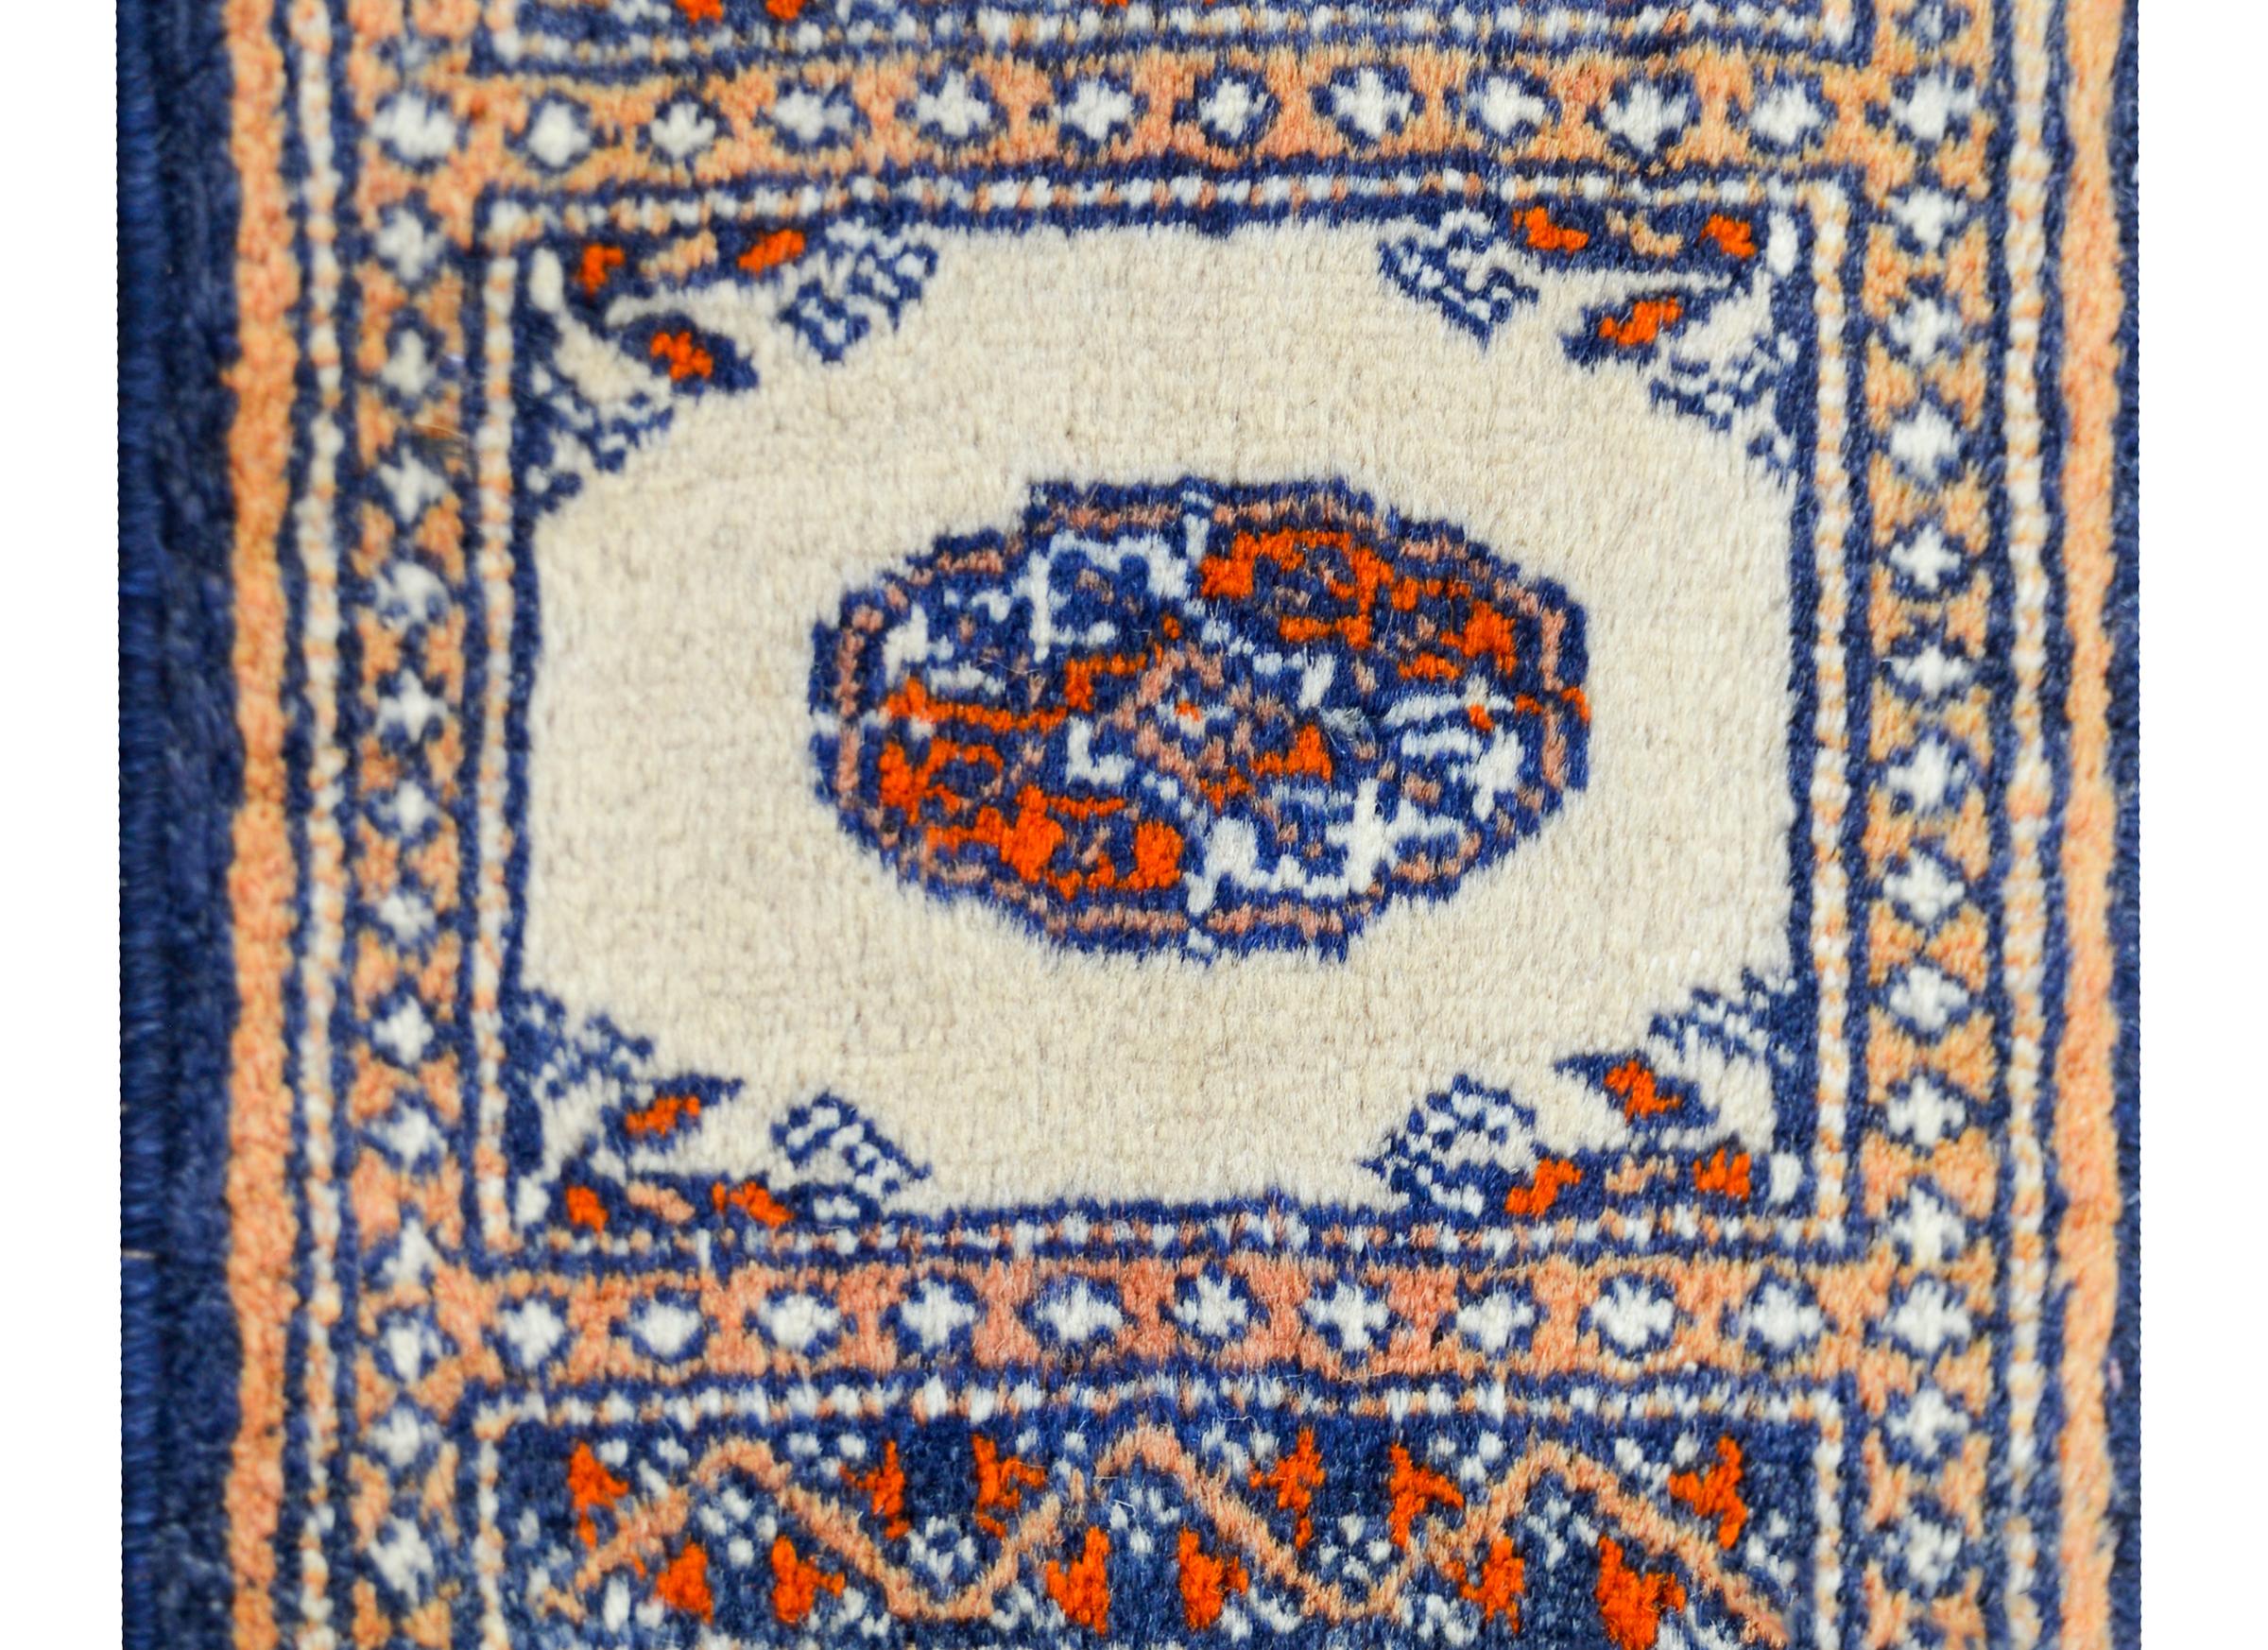 A petite vintage Pakistani Bakhara rug with a simple central medallion woven in orange and white, set against a cream background, and surrounded by border of geometric patterns woven in similar colors as the field.